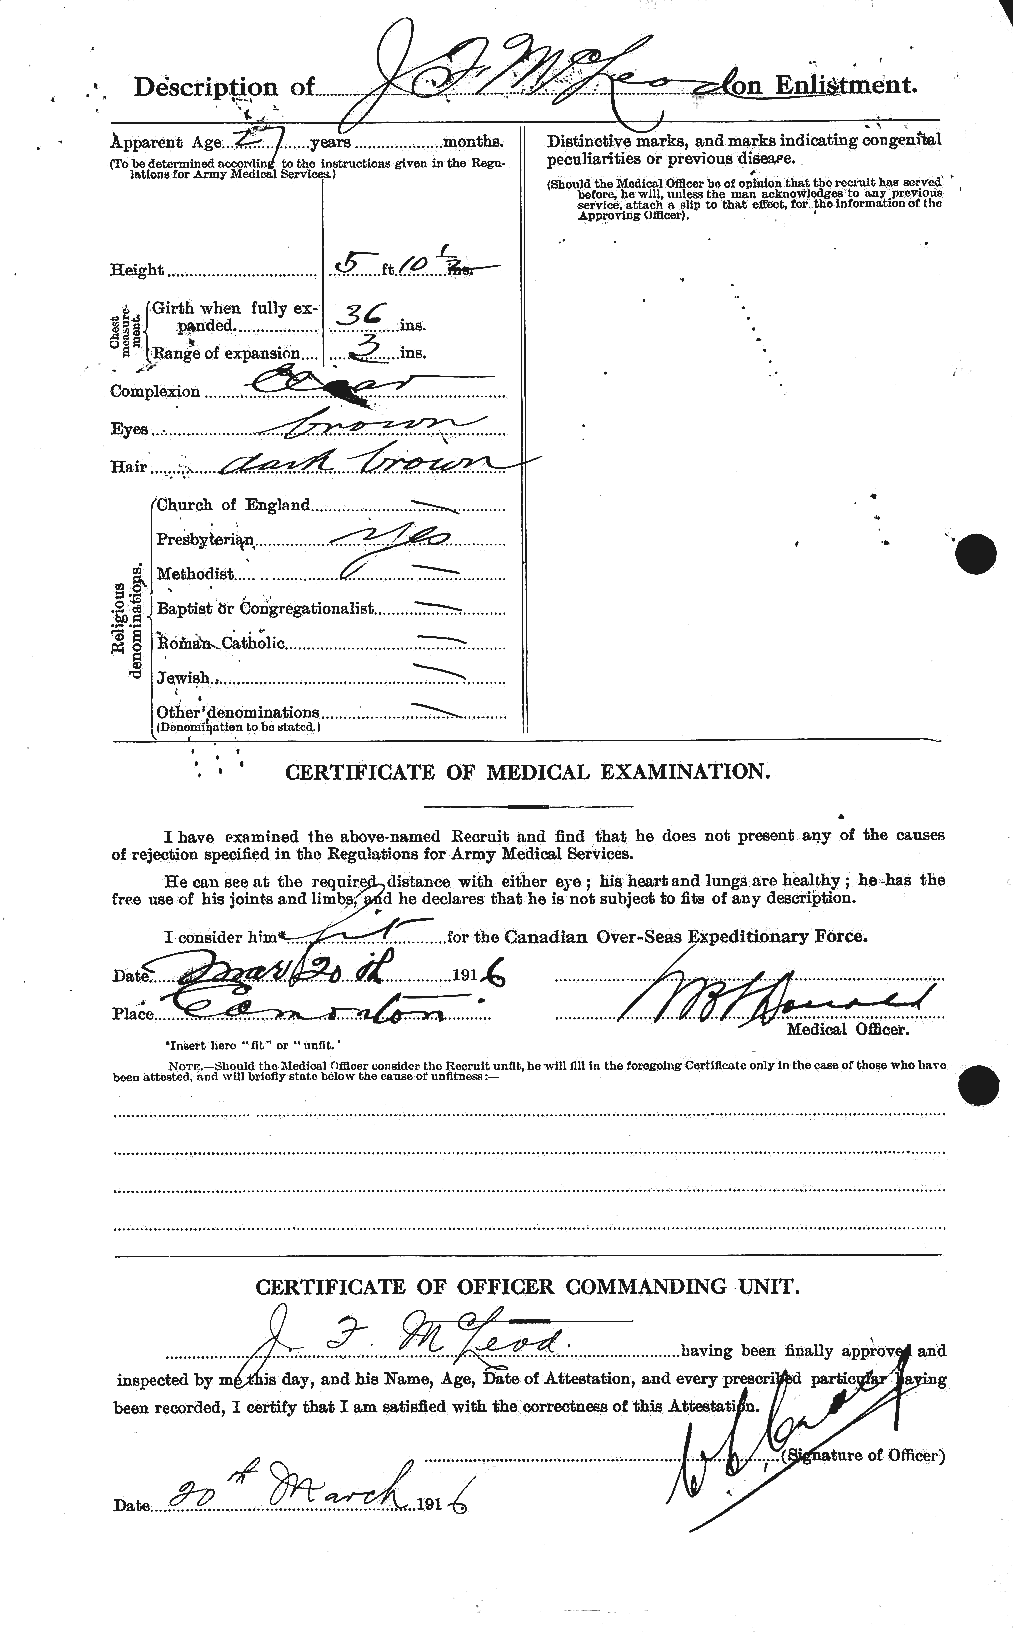 Personnel Records of the First World War - CEF 535000b